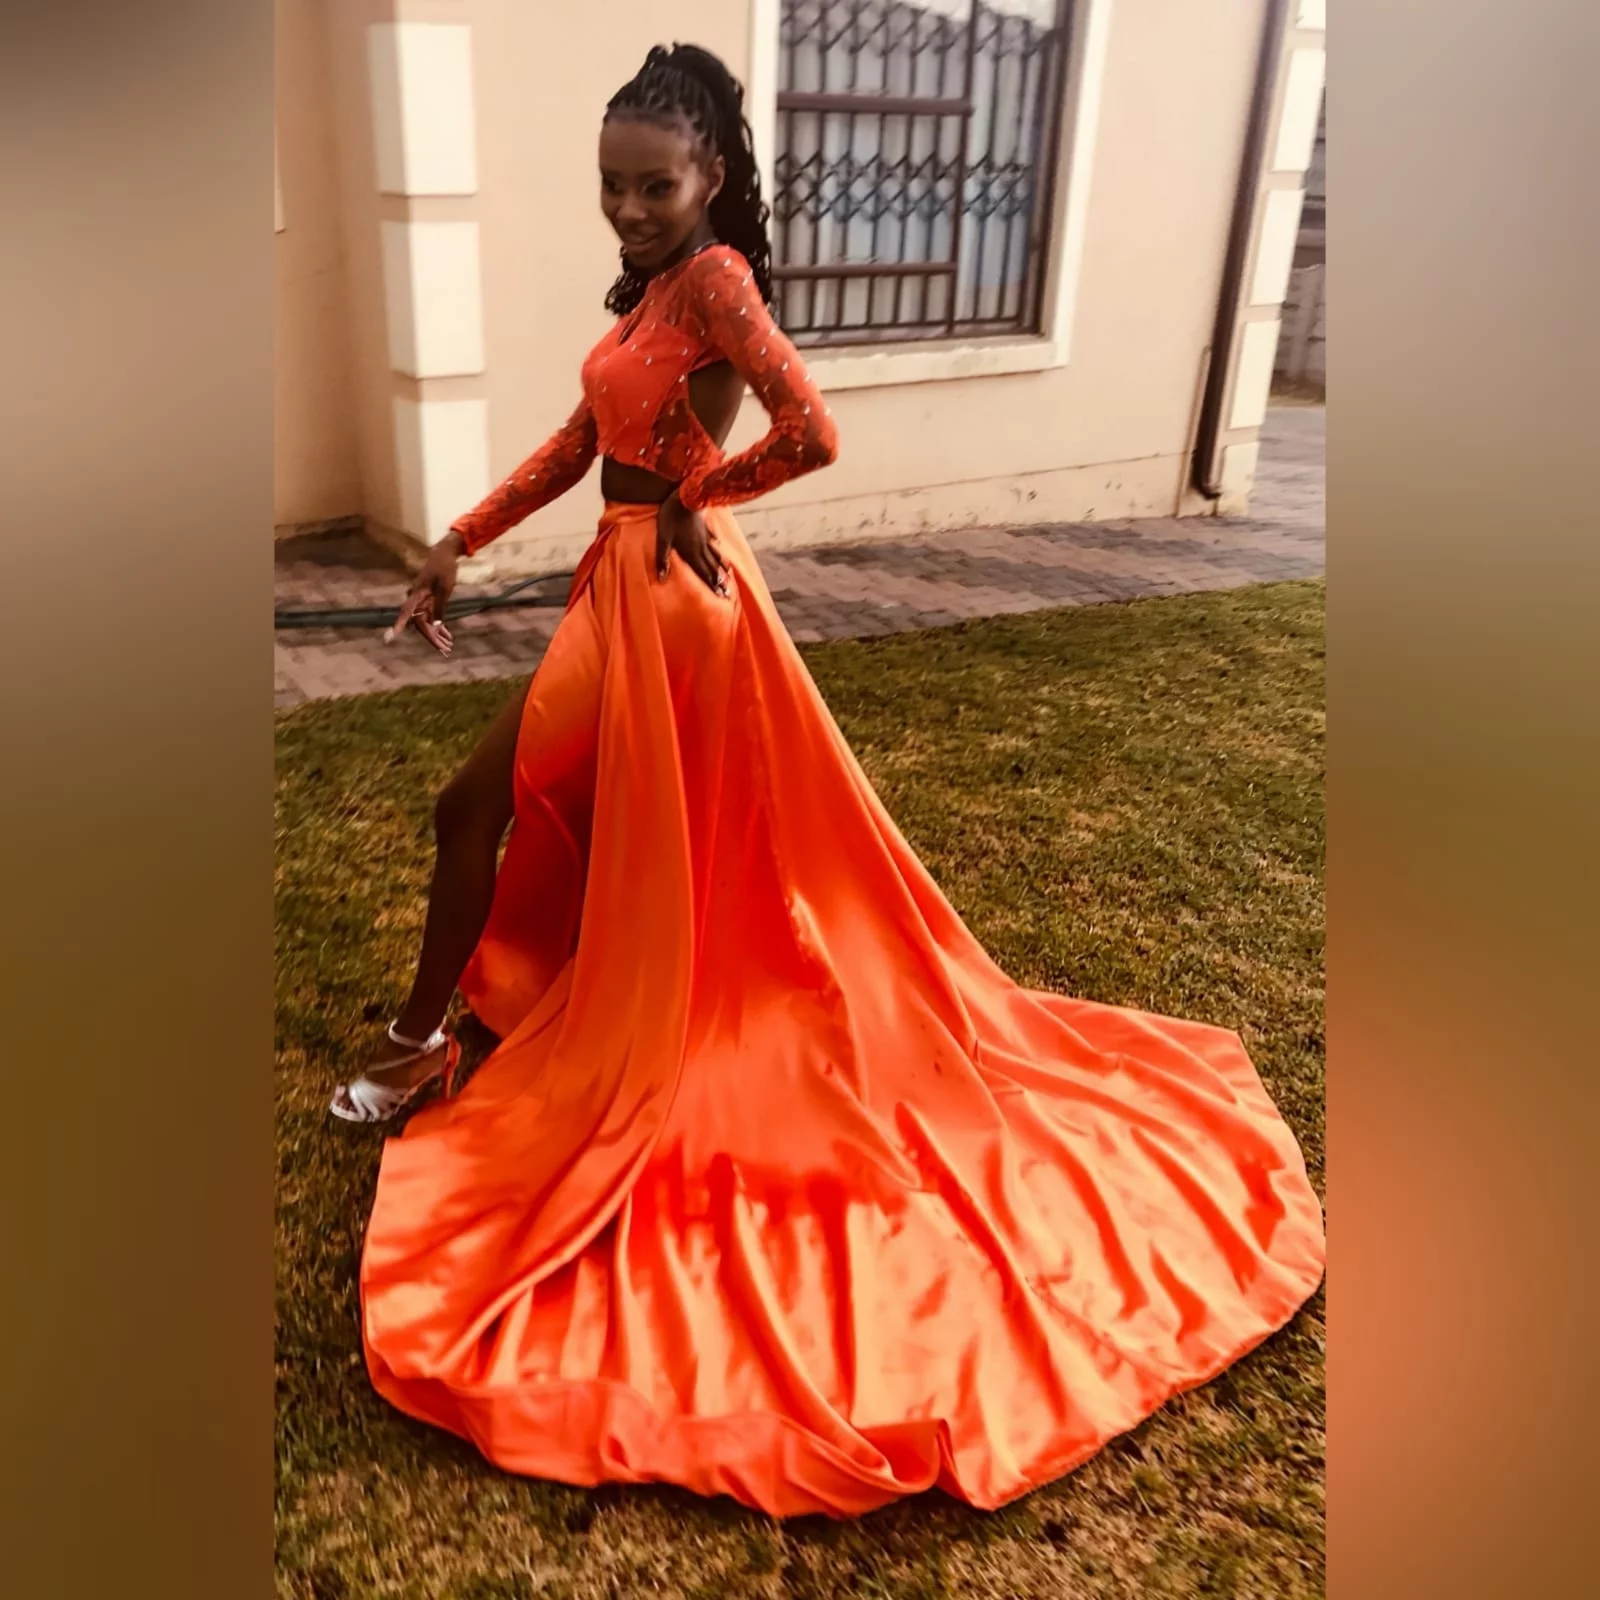 2 piece orange prom dress with a lace crop top 10 2 piece orange prom dress with a lace crop top detailed with silver beads. Flowy, shiny skirt with crossed slit and long train.